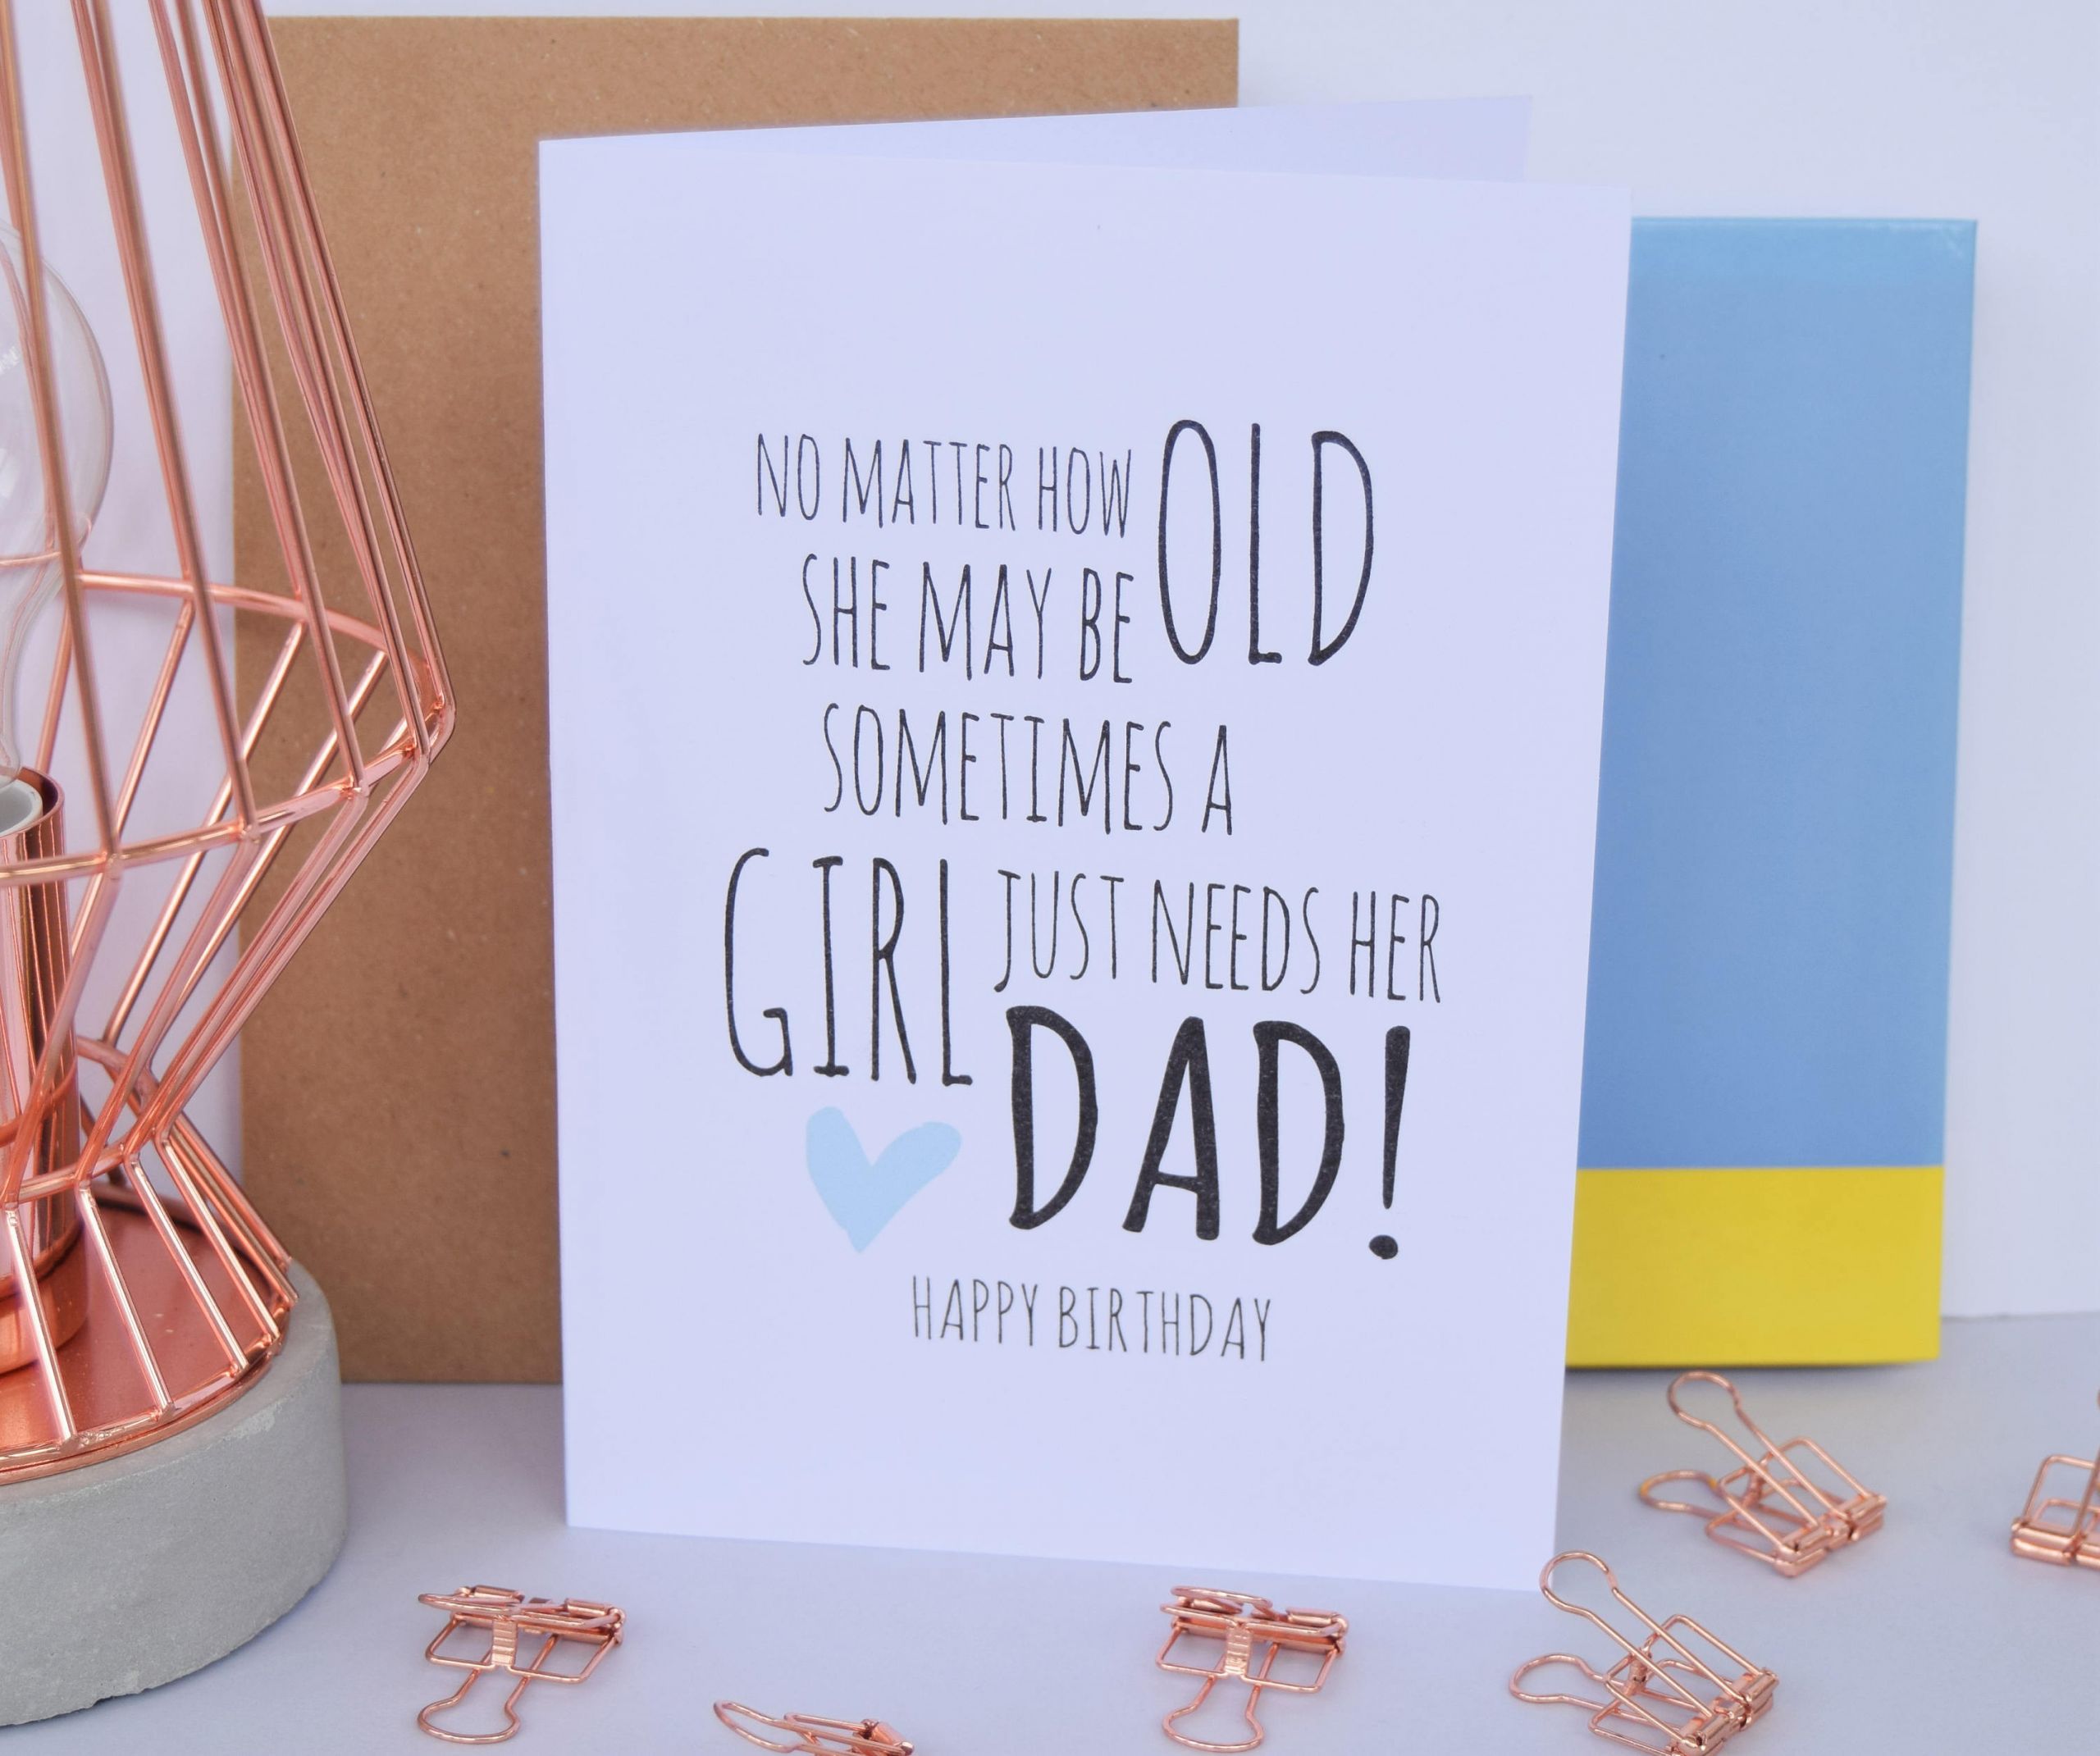 Birthday Gift Ideas For Dad From Daughter
 Dad Birthday Card A Girl Just Needs Her Dad Daughter Dad